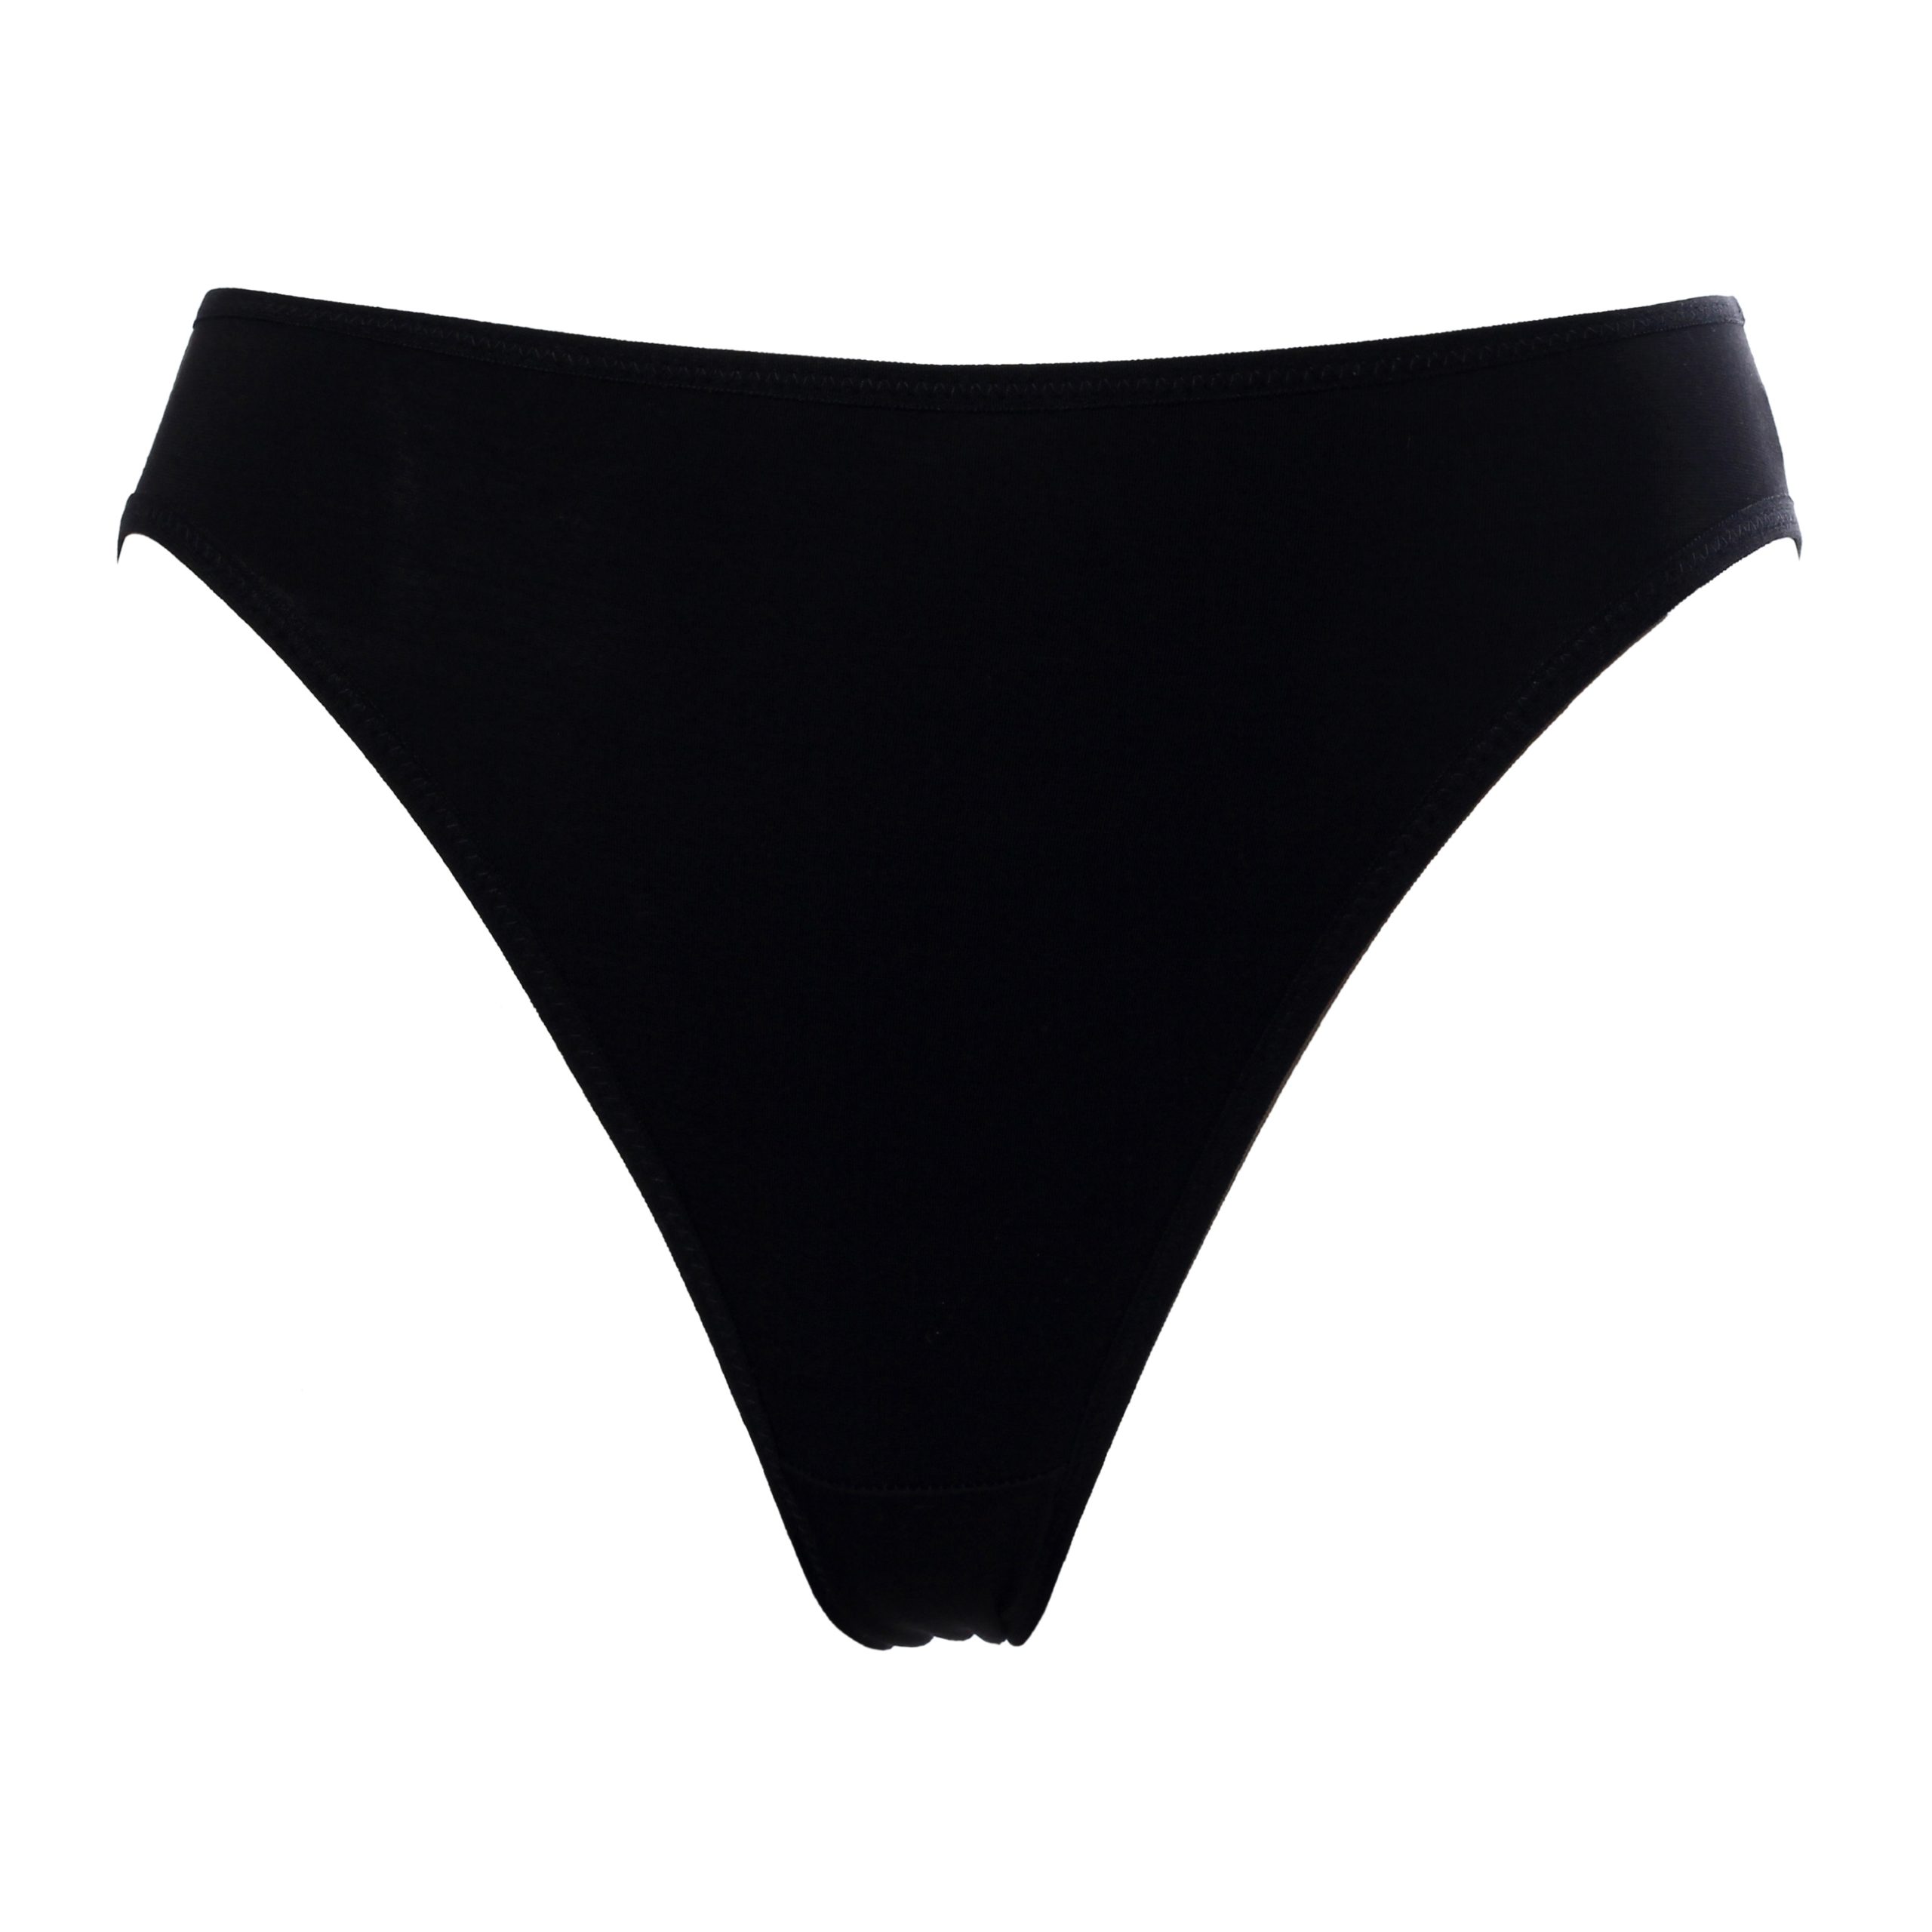 High Cut Panties From Black Jersey by Flash you and me